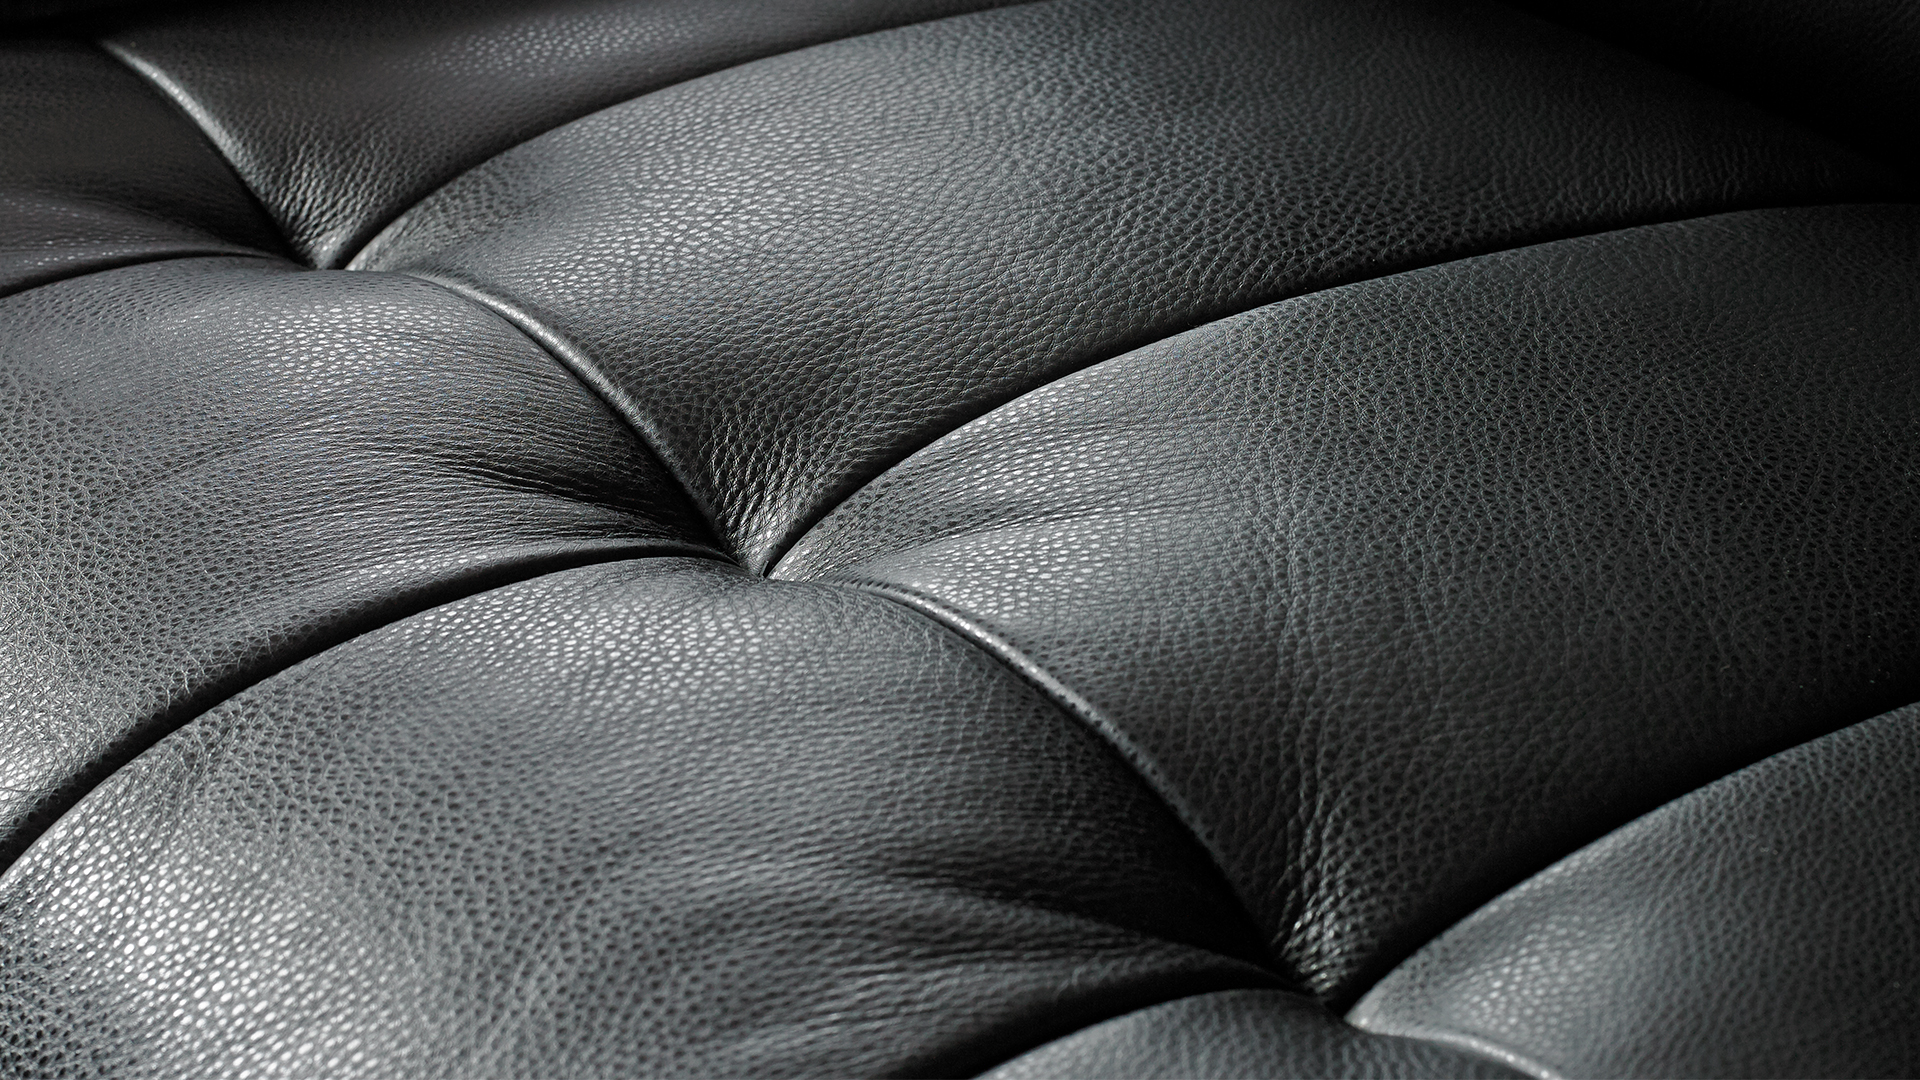 caring for a leather sofa